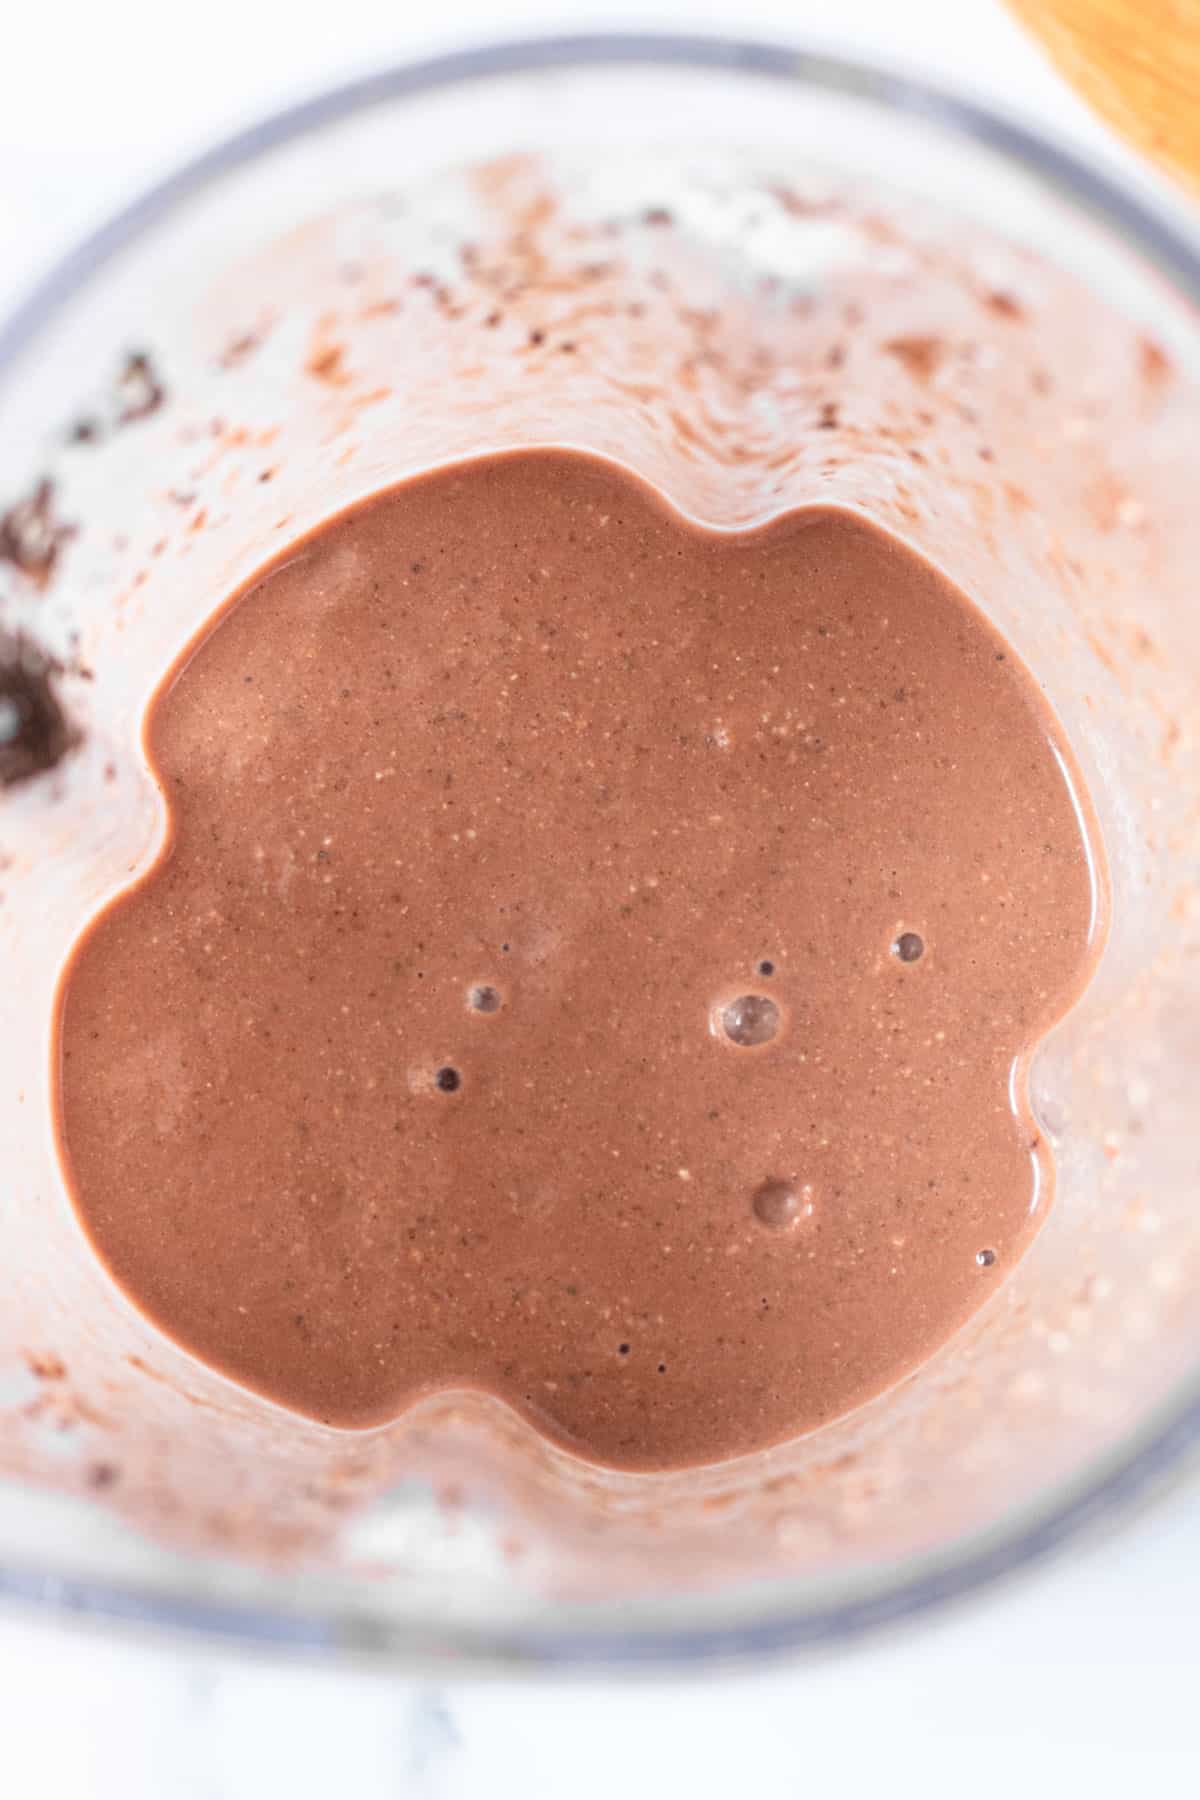 Chocolate coconut smoothie blended up in a blender.